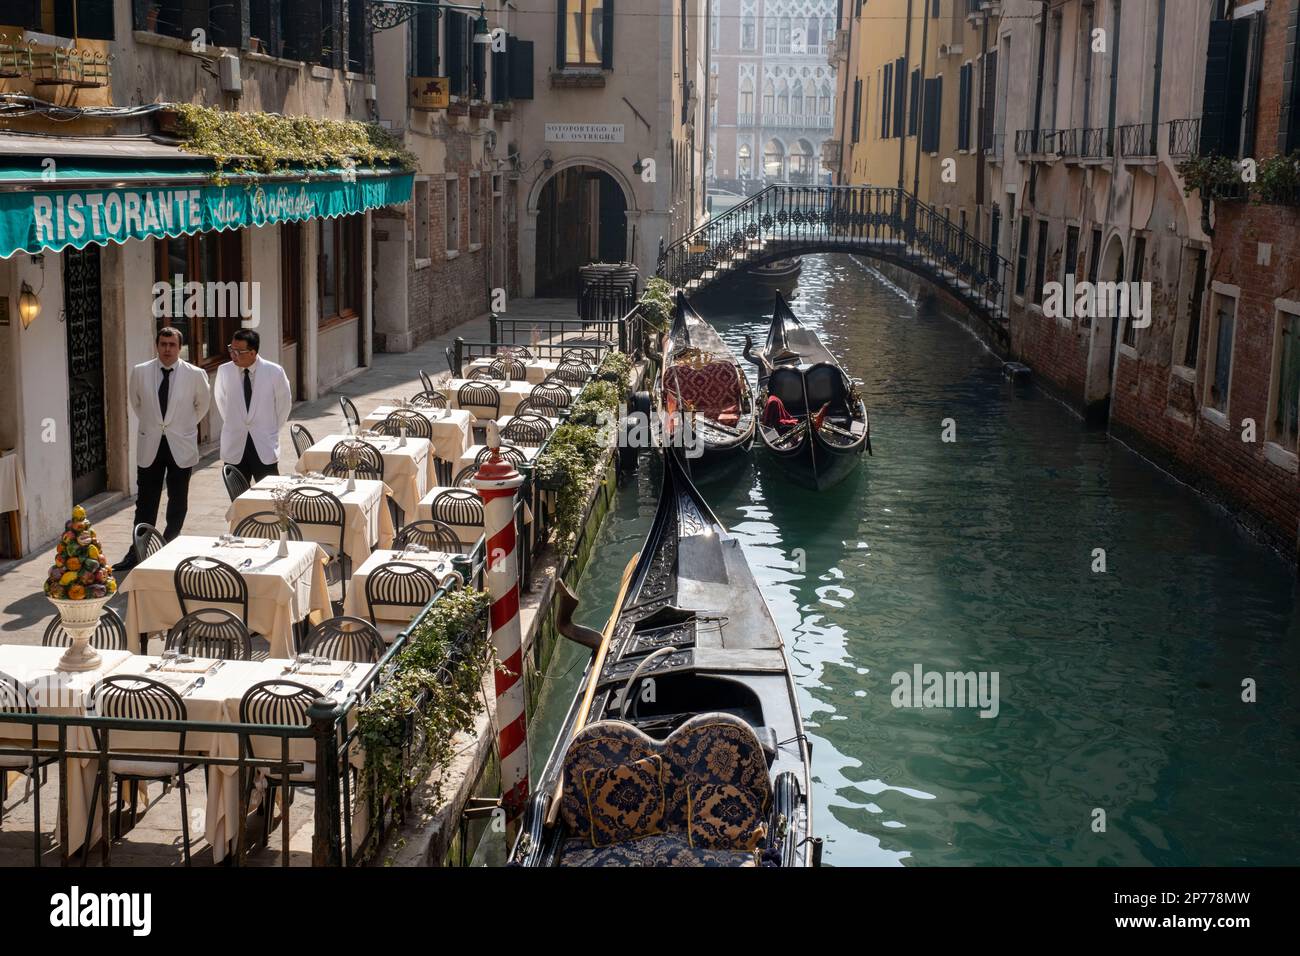 Waiters standing outside a canal side restaurant, Venice, Italy Stock Photo